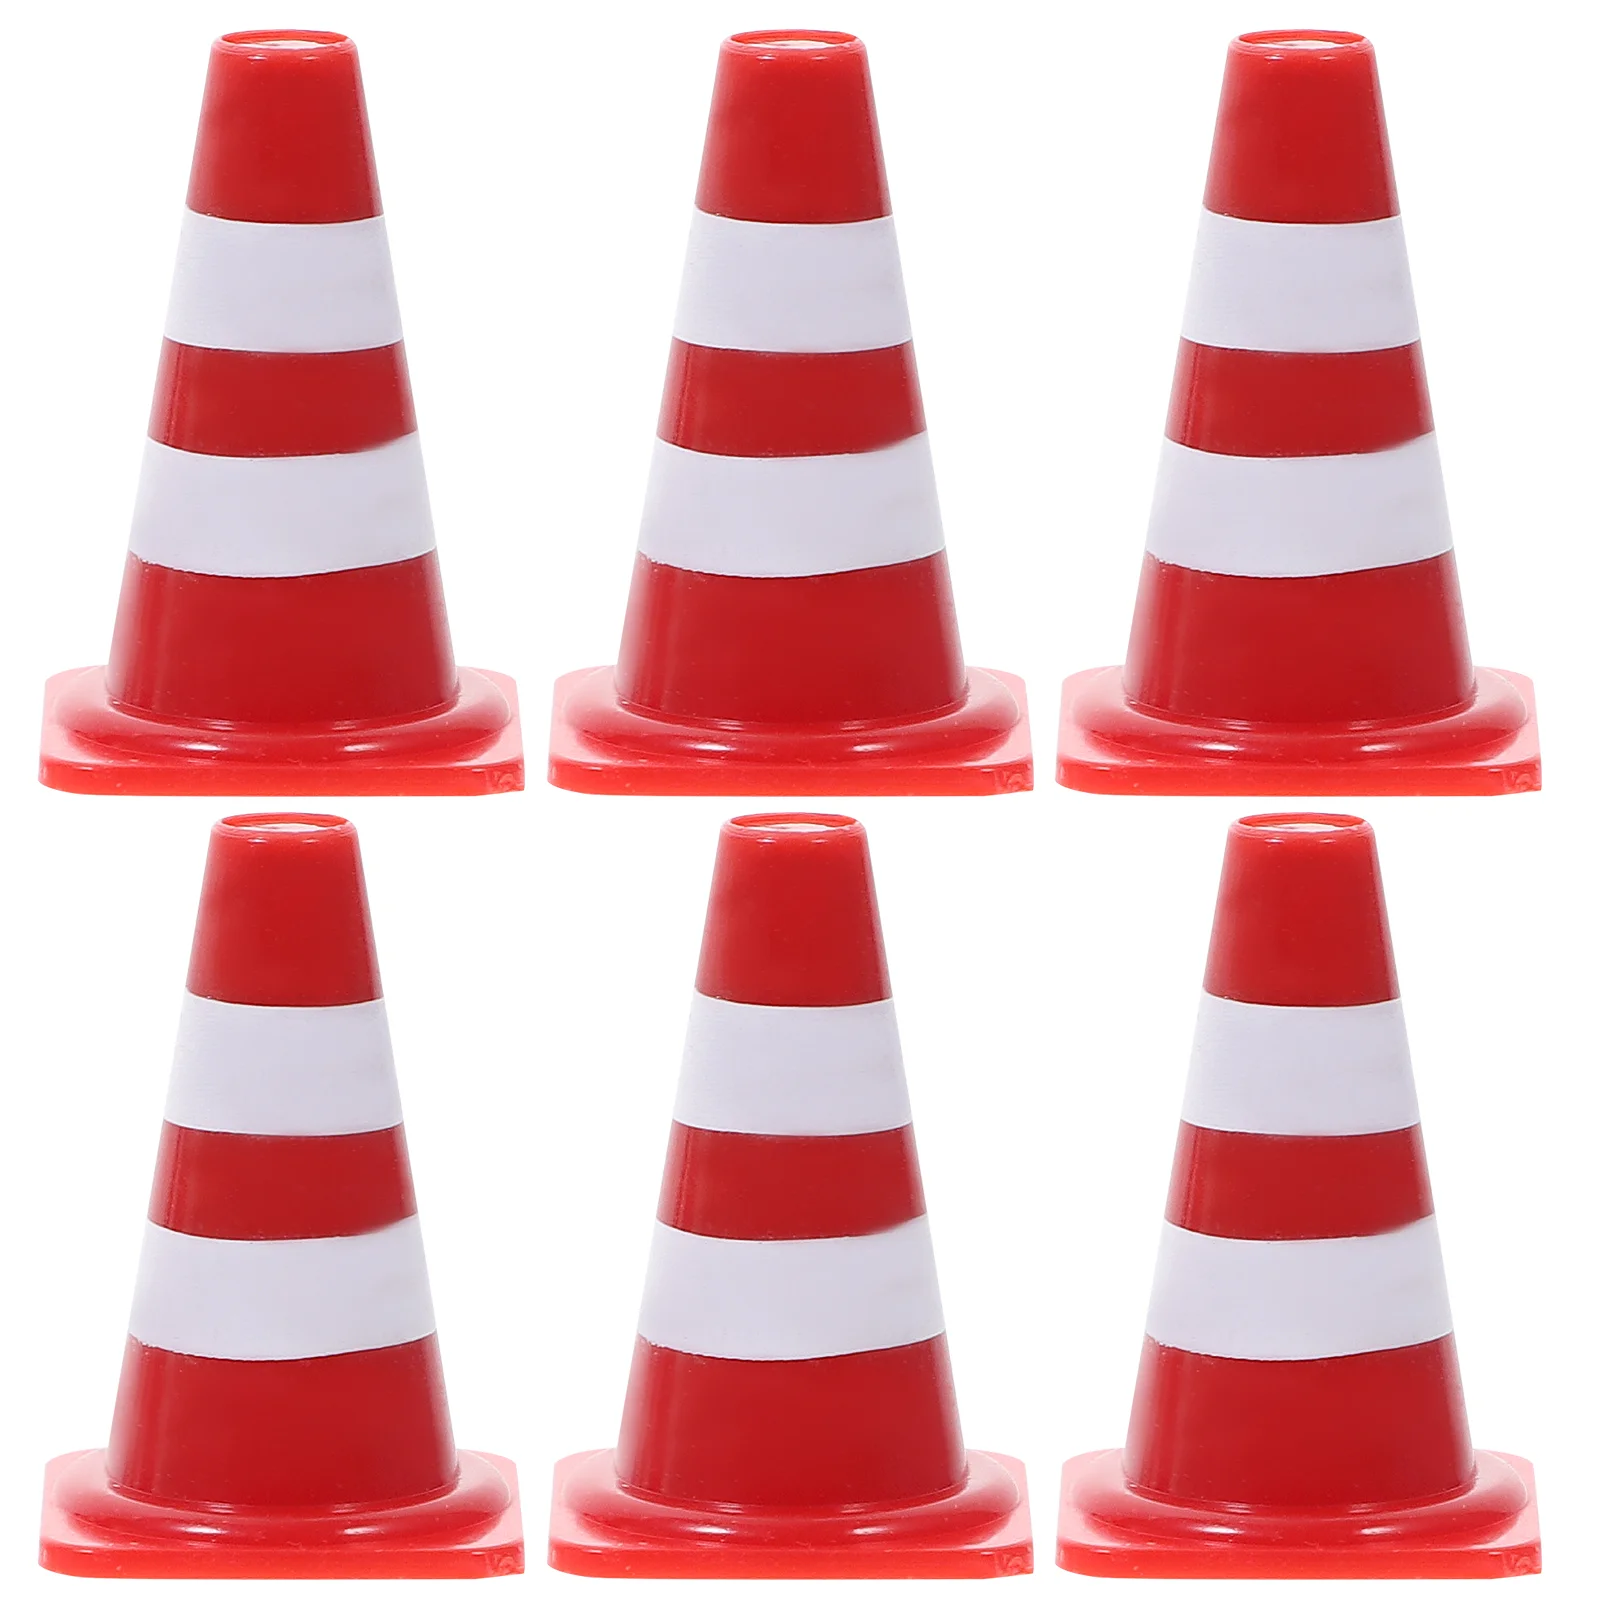 

Roadblock Simulation Props Barricade Model Kids Traffic Sign Teaching Aids Cognitive Toy Scene Plaything Puzzle Toys